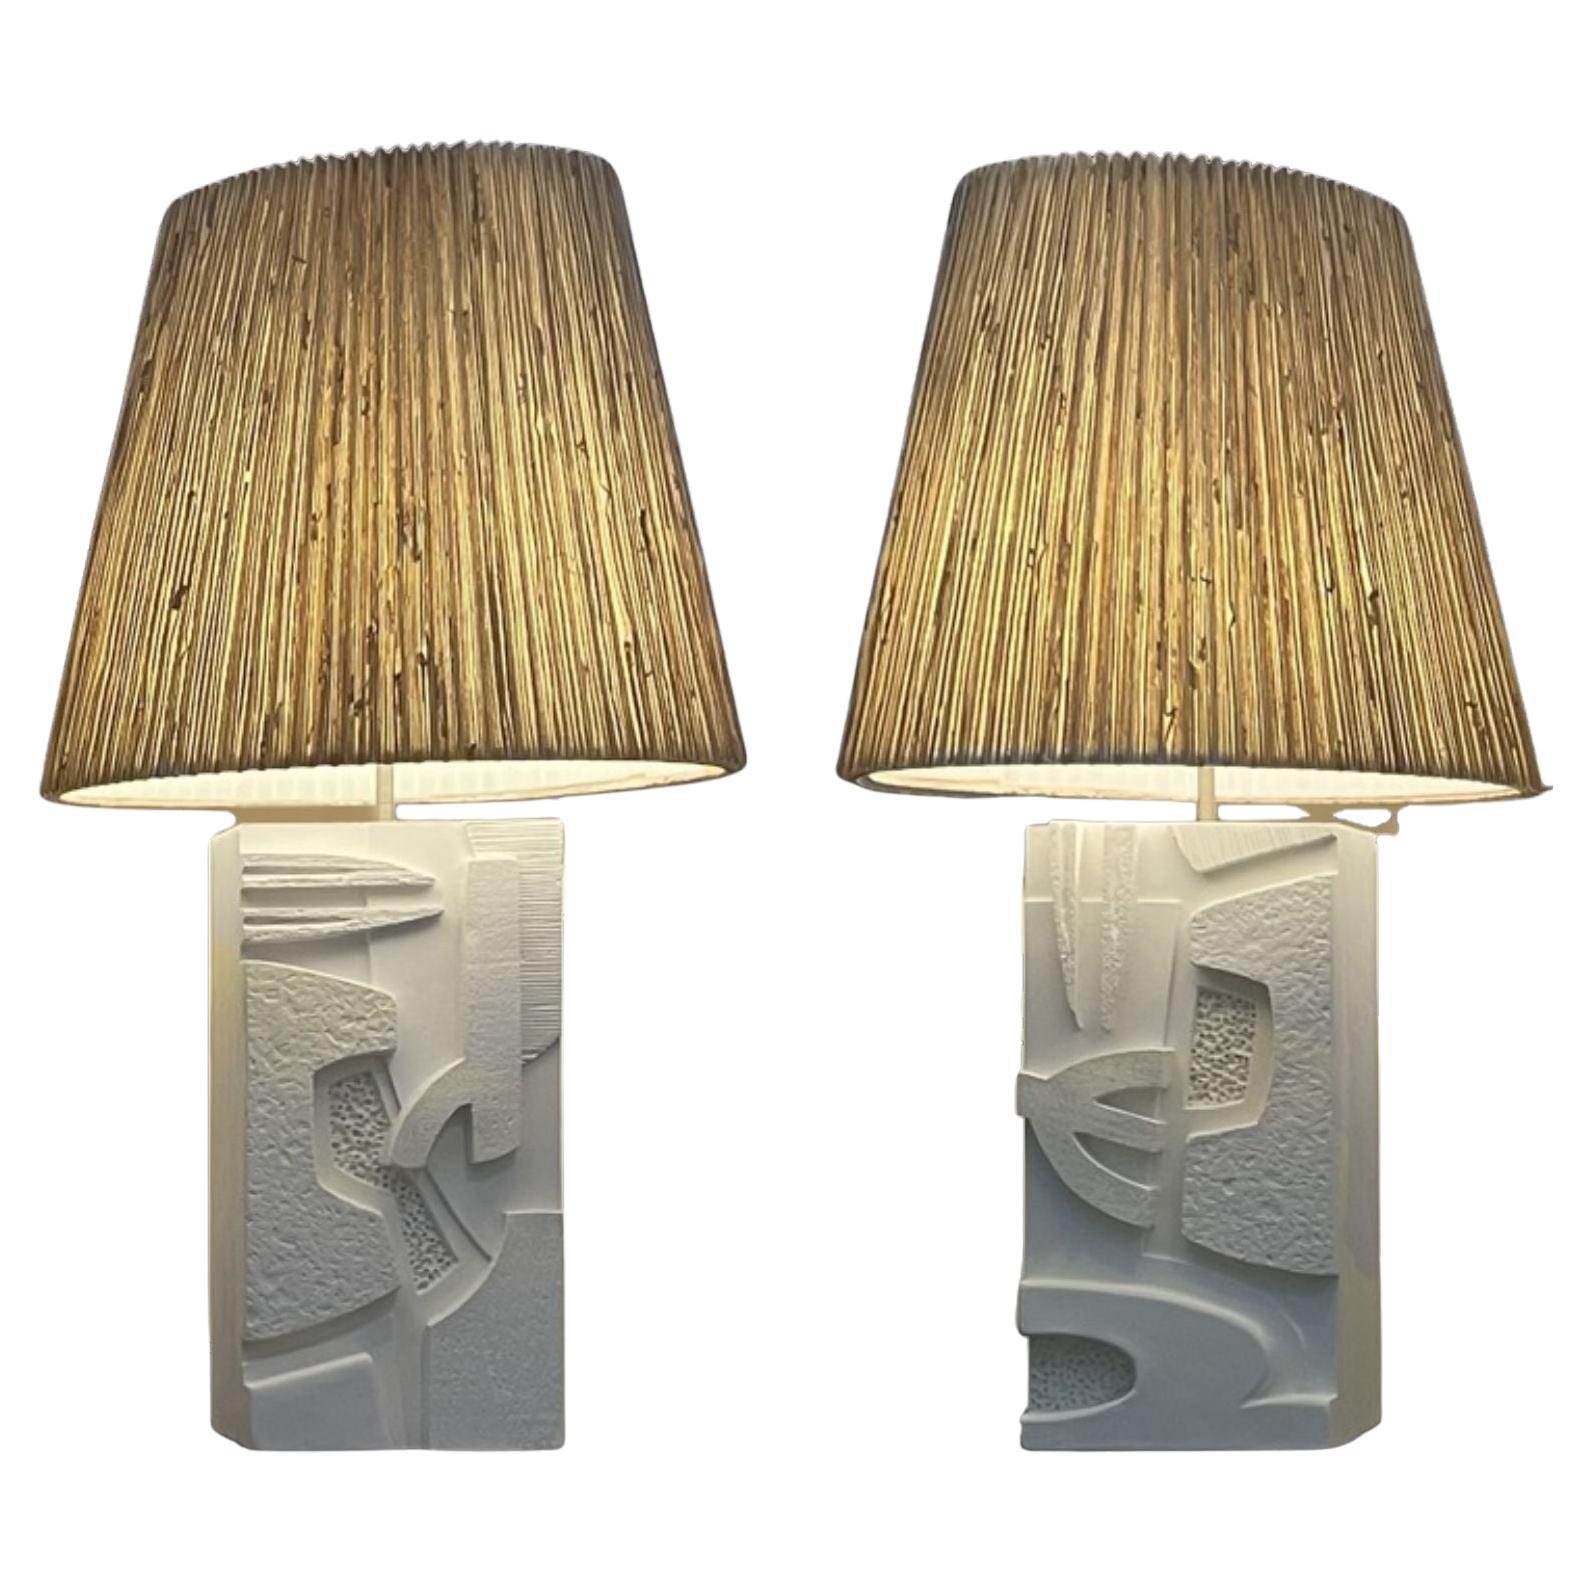 Set of 2 Complementary Pêle-mêle Table Lamps by Daniel Schneiger